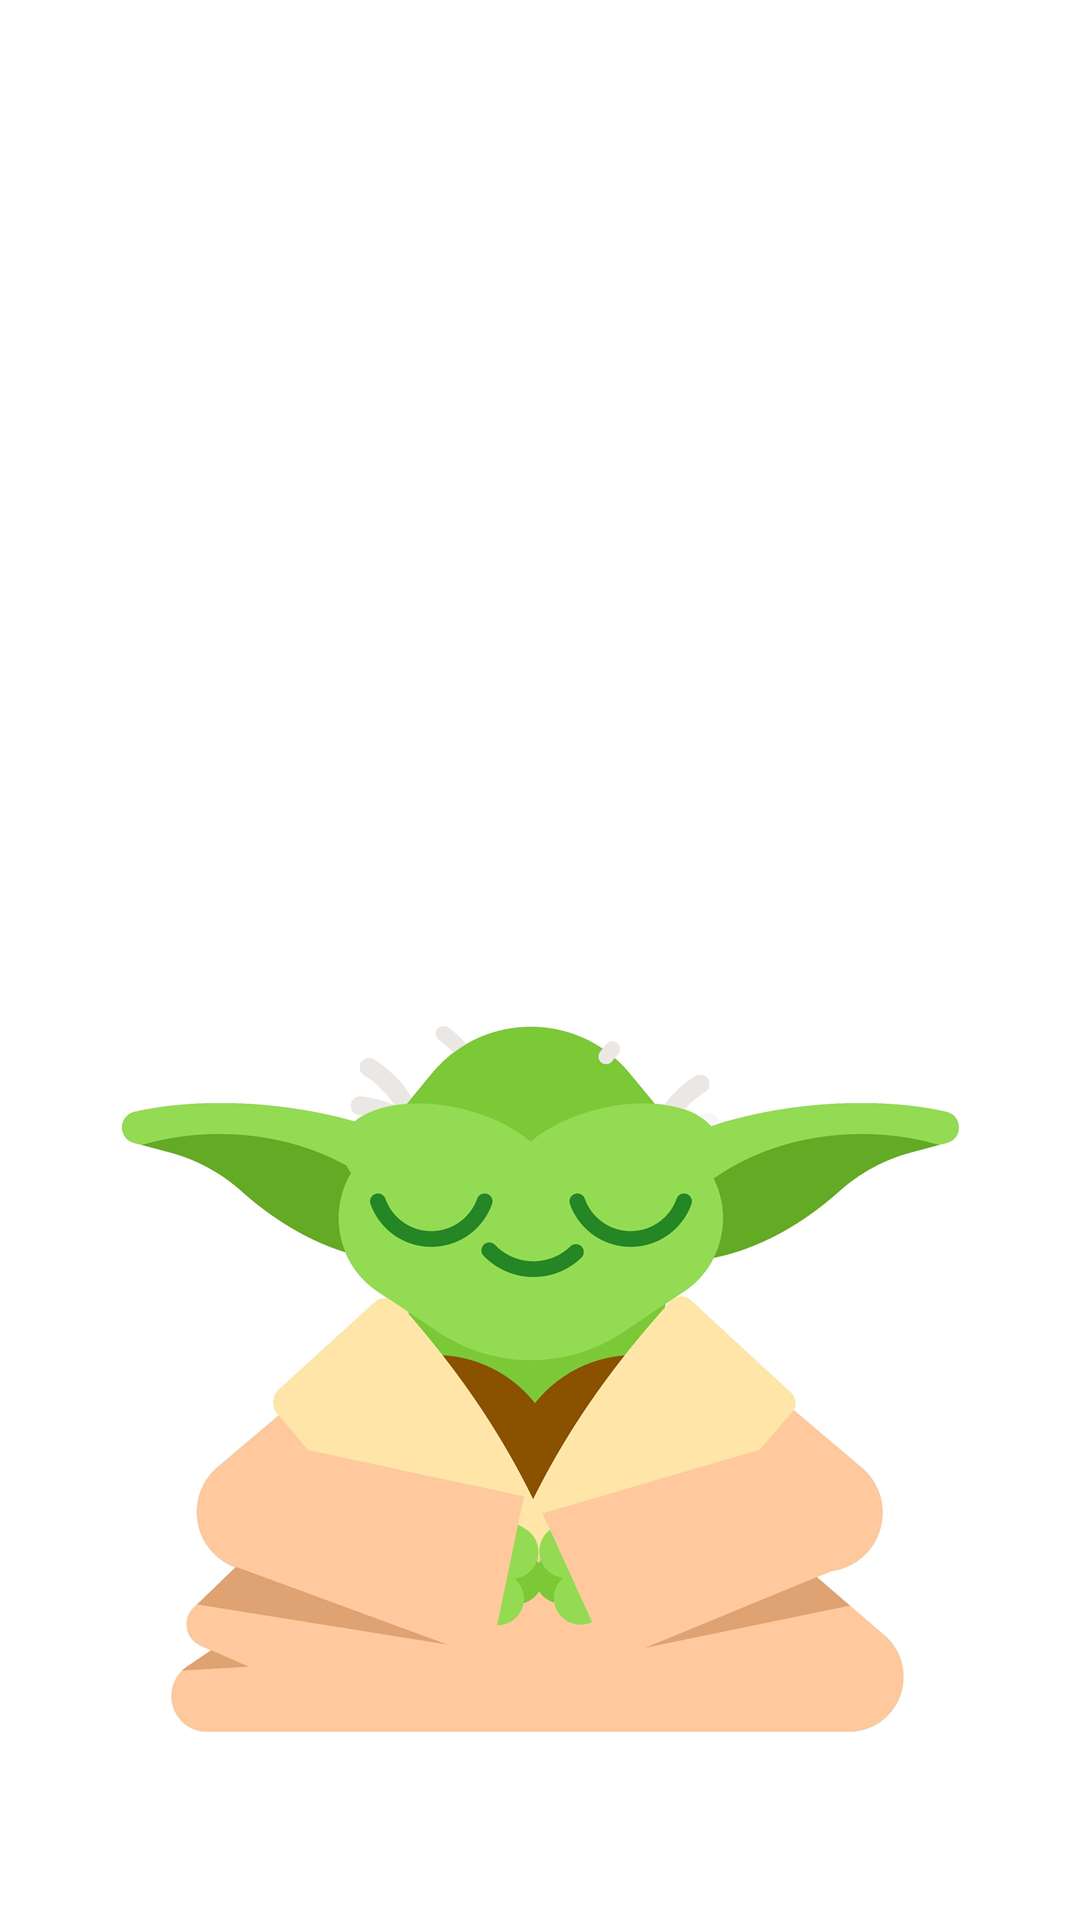 Connect with your breath as Yoda connects to the Force.